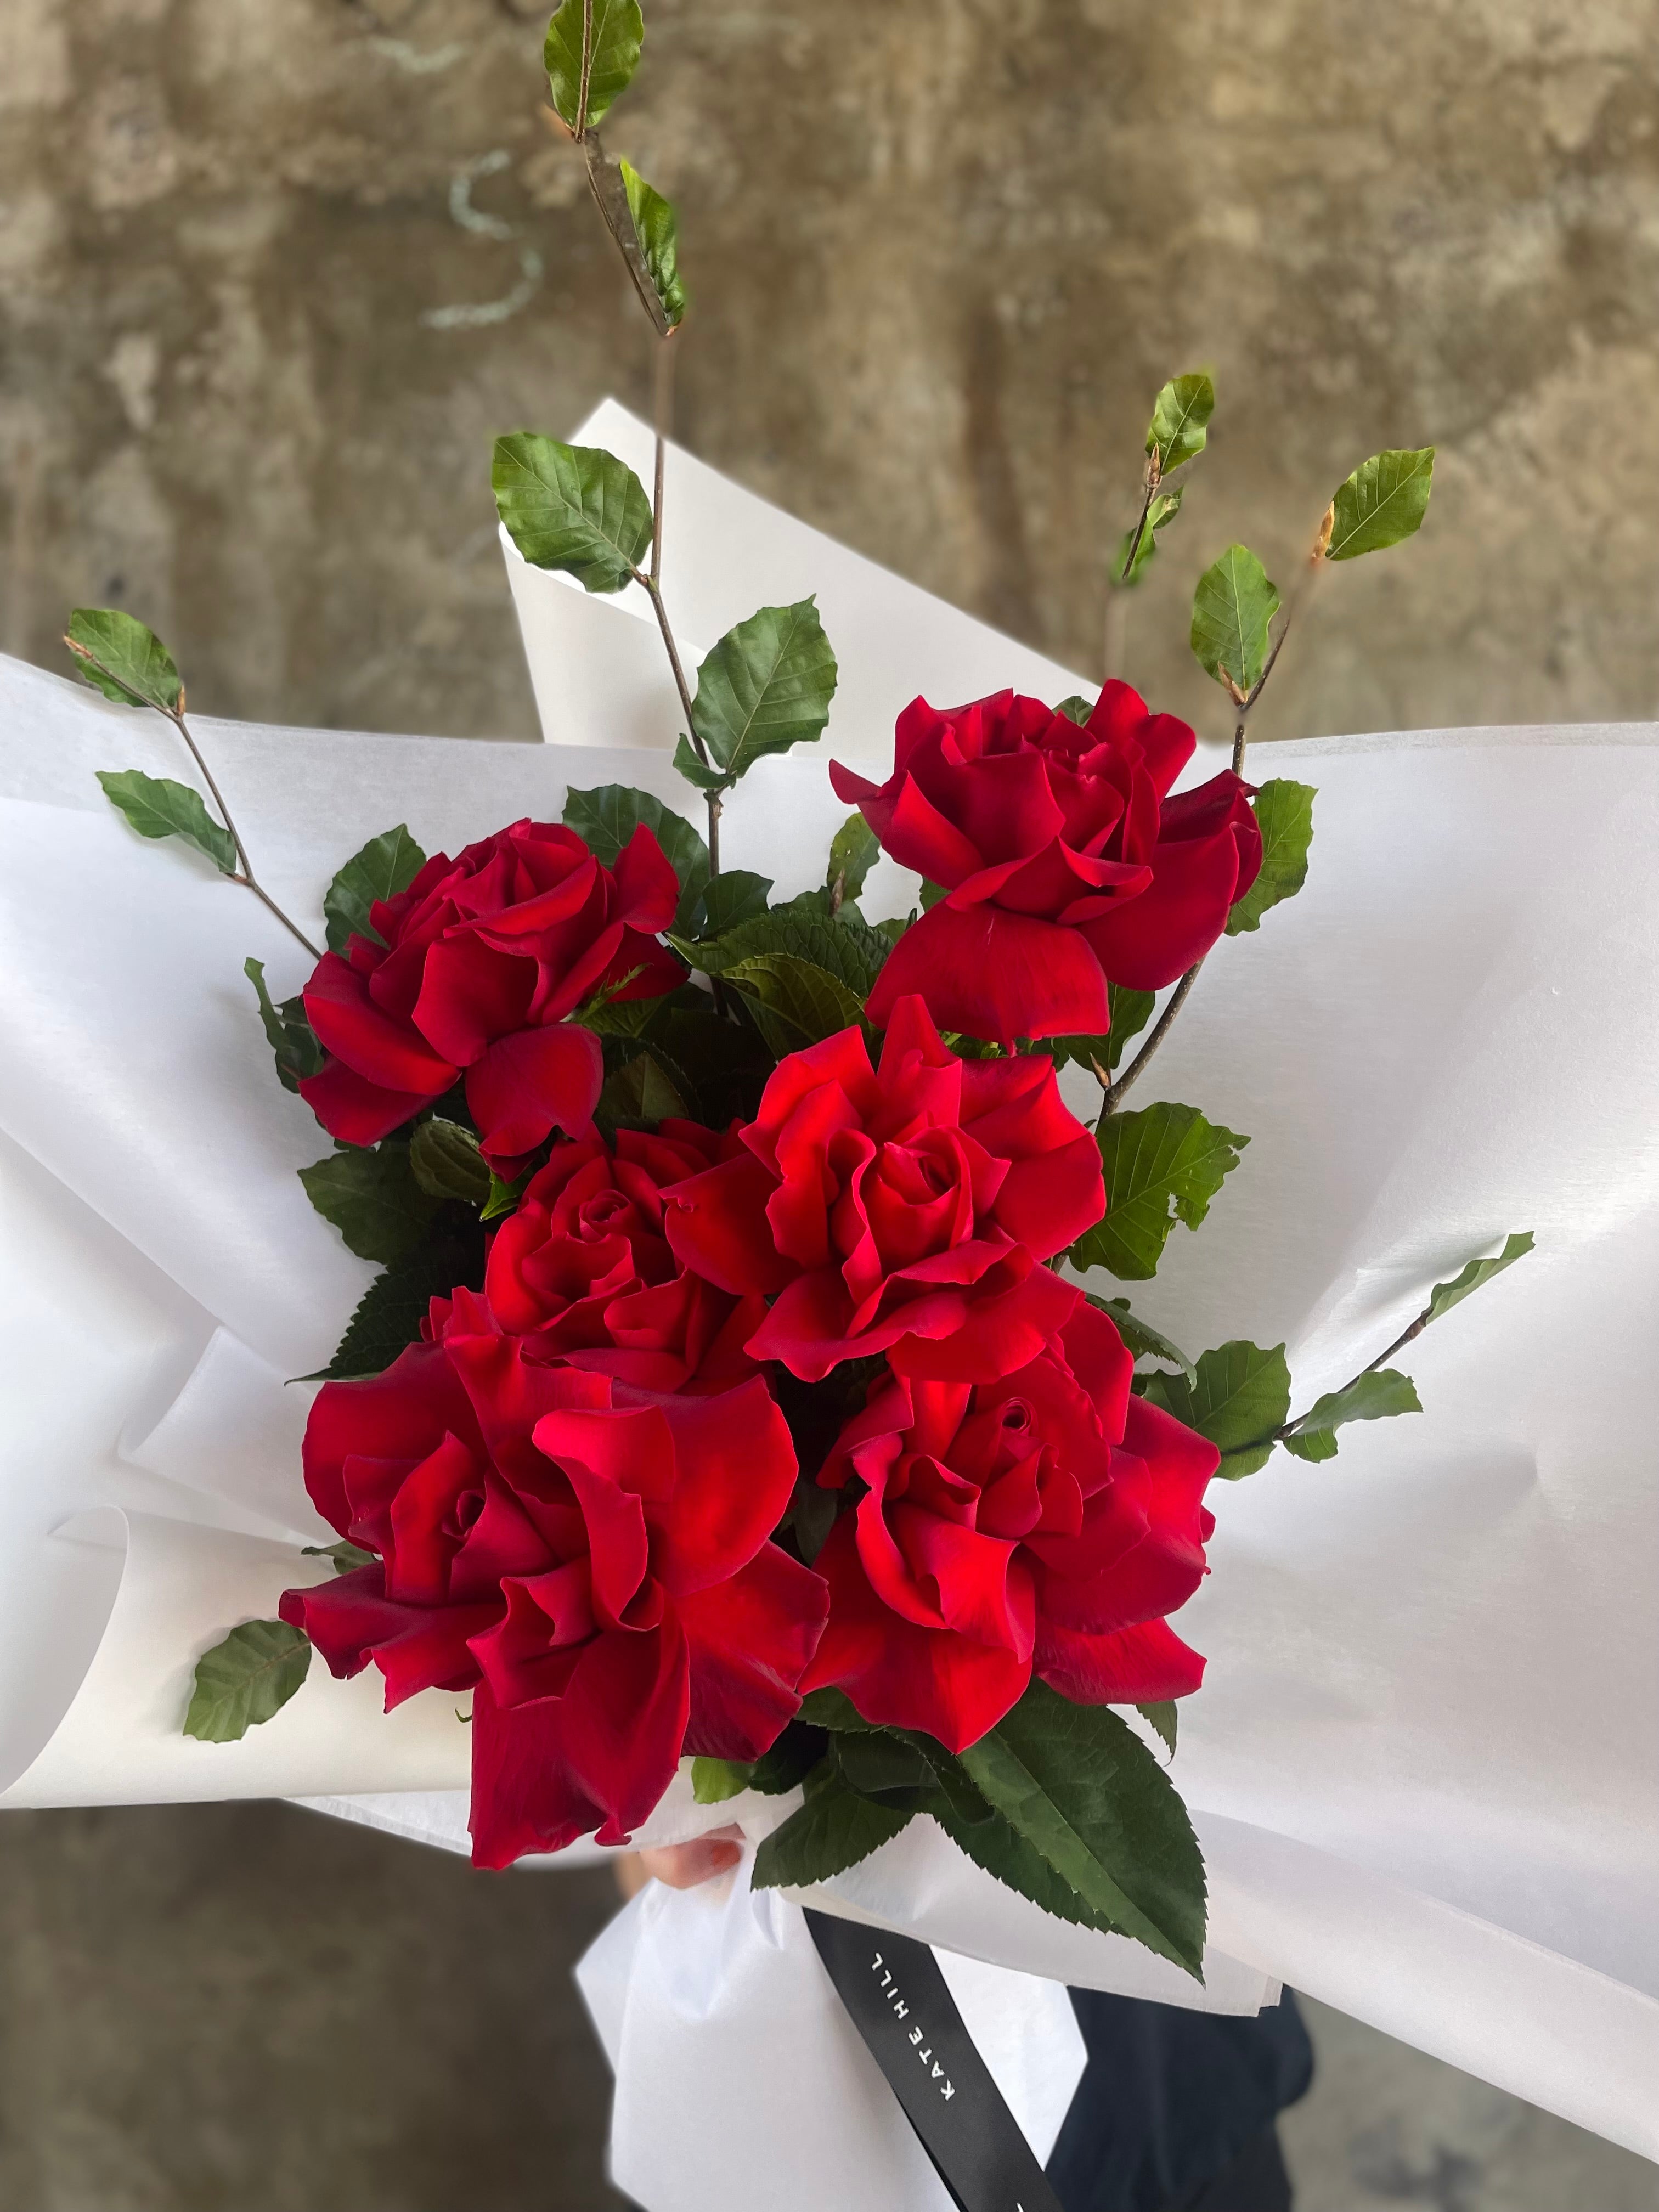 Close up image of the red rose bouquet. Simple red rose bouquet displaying 6 stems of red reflexed roses. Valentines day or Romance gift bouquet 